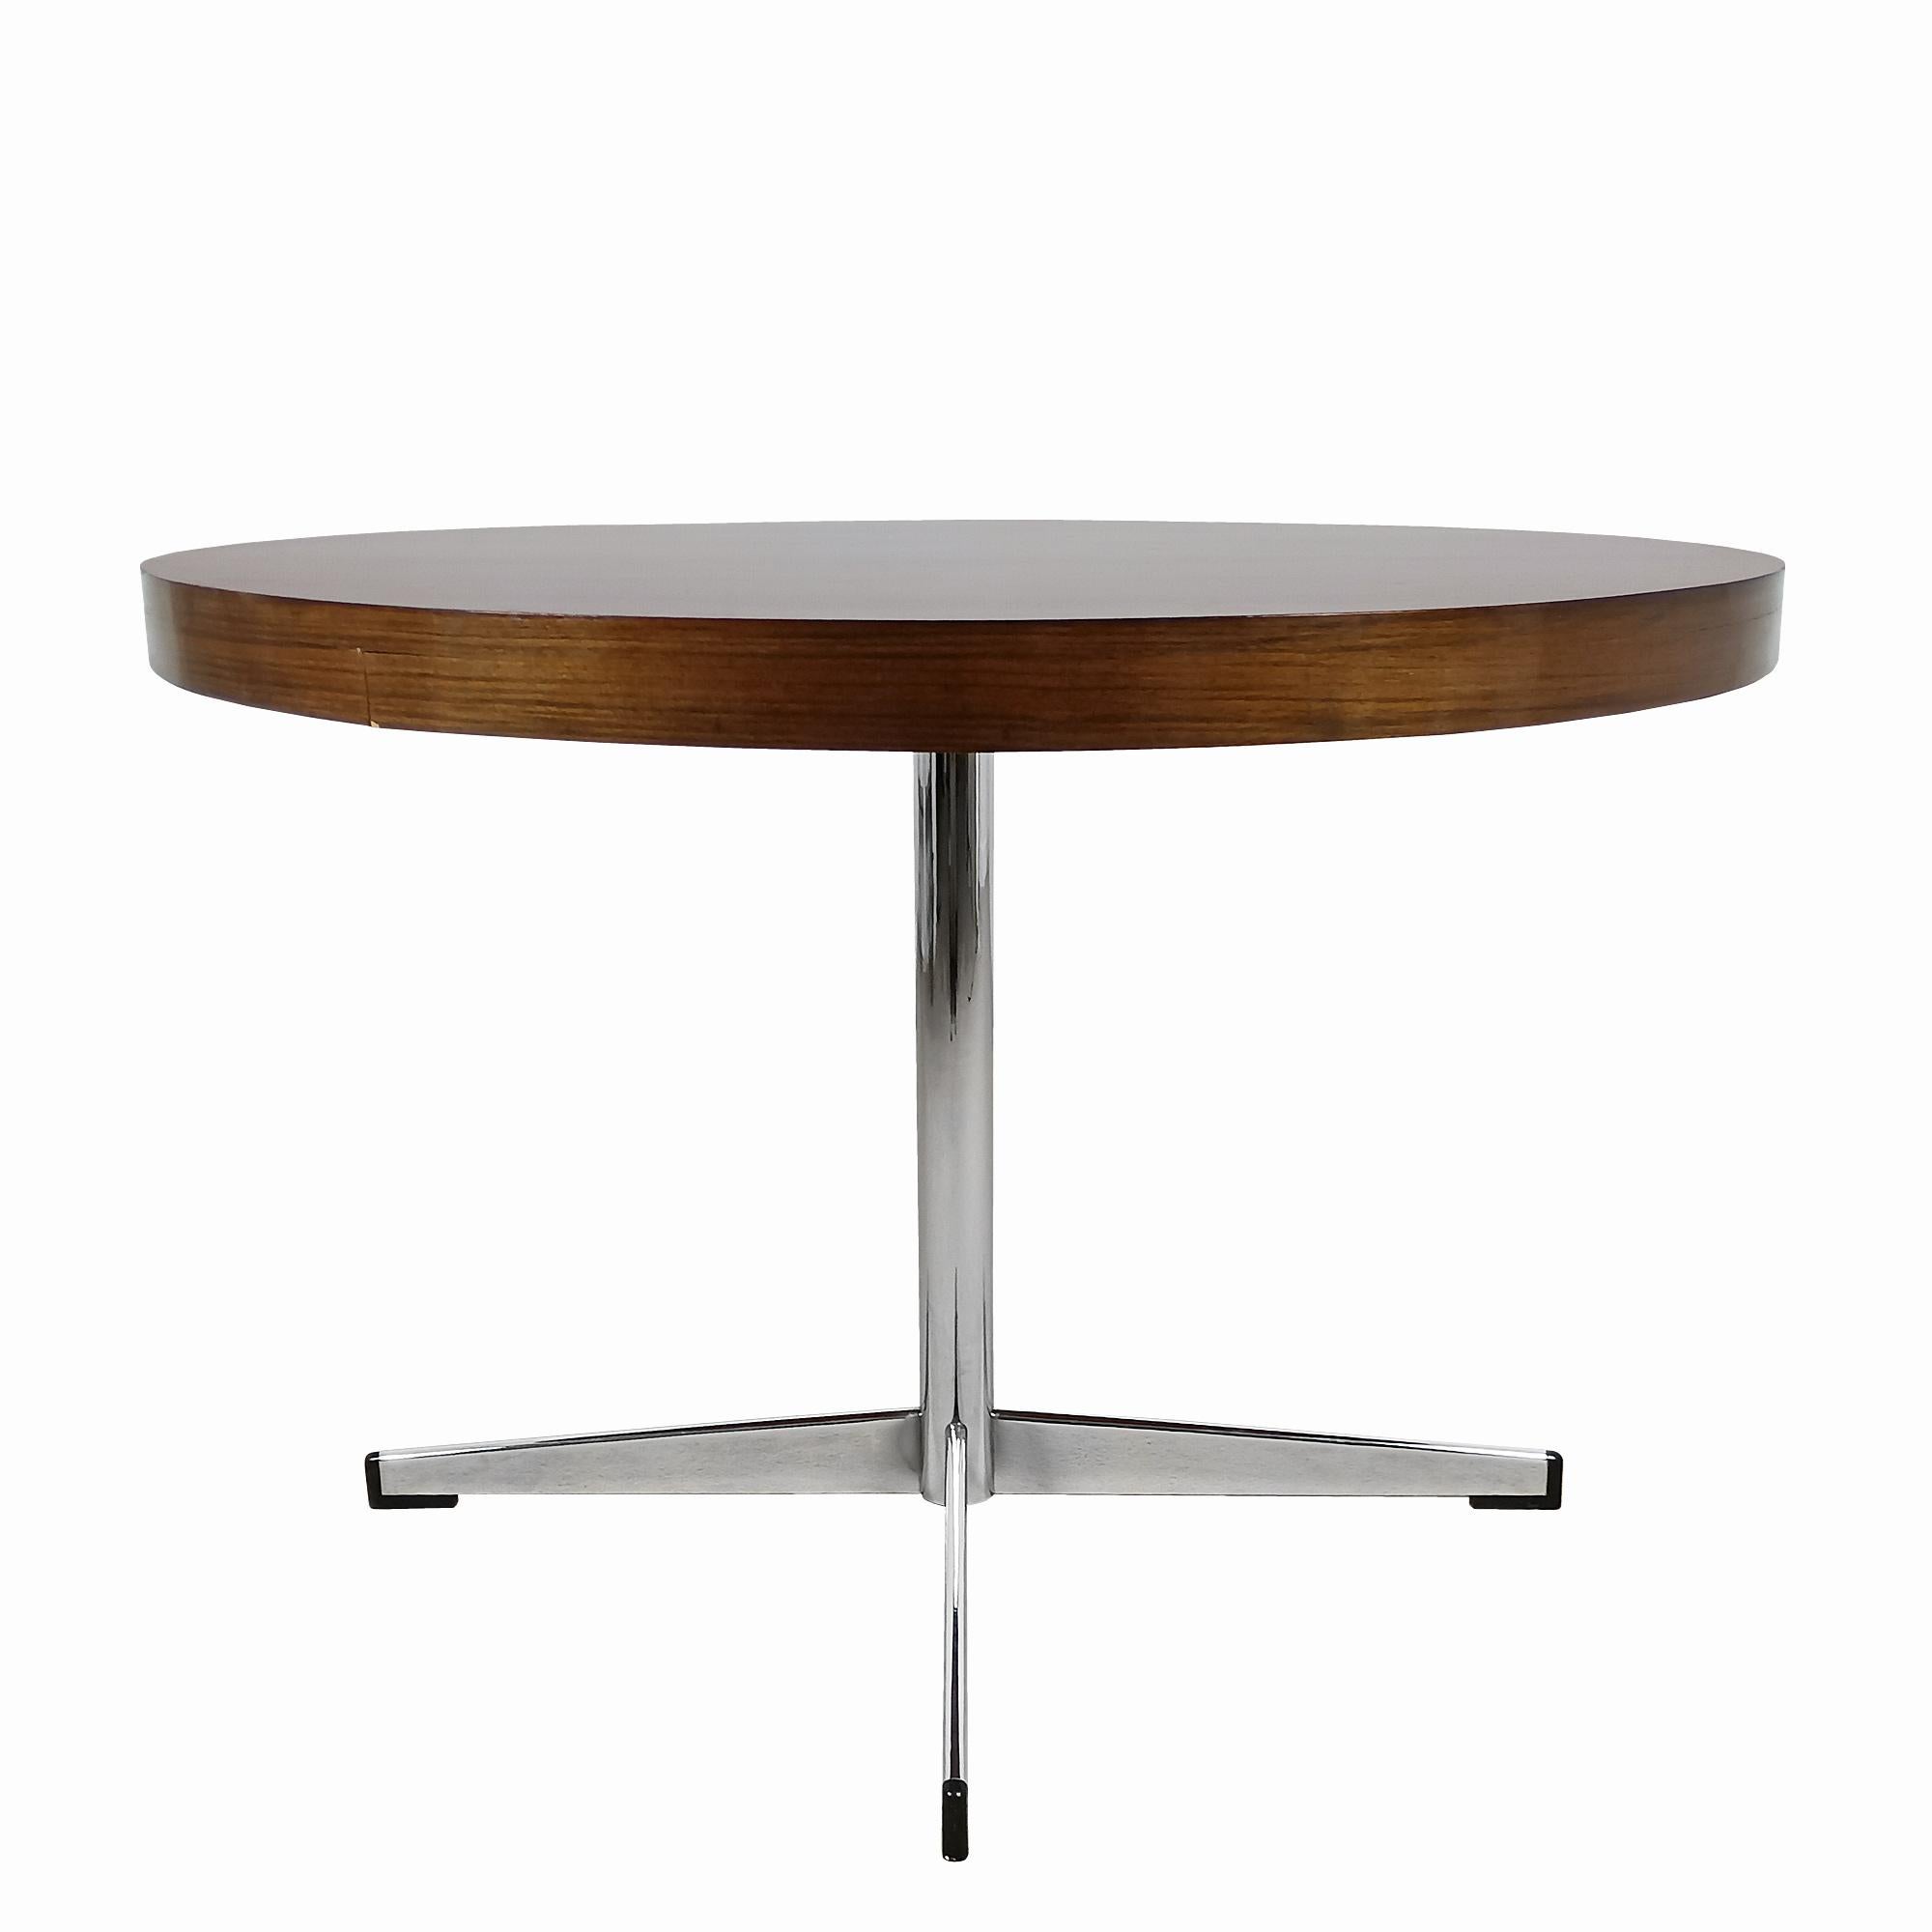 Round table with central foot in nickel-plated steel and black lacquered clogs, solid wood top in walnut veneer. Very nice quality.

Barcelona, Spain c. 1960.

 